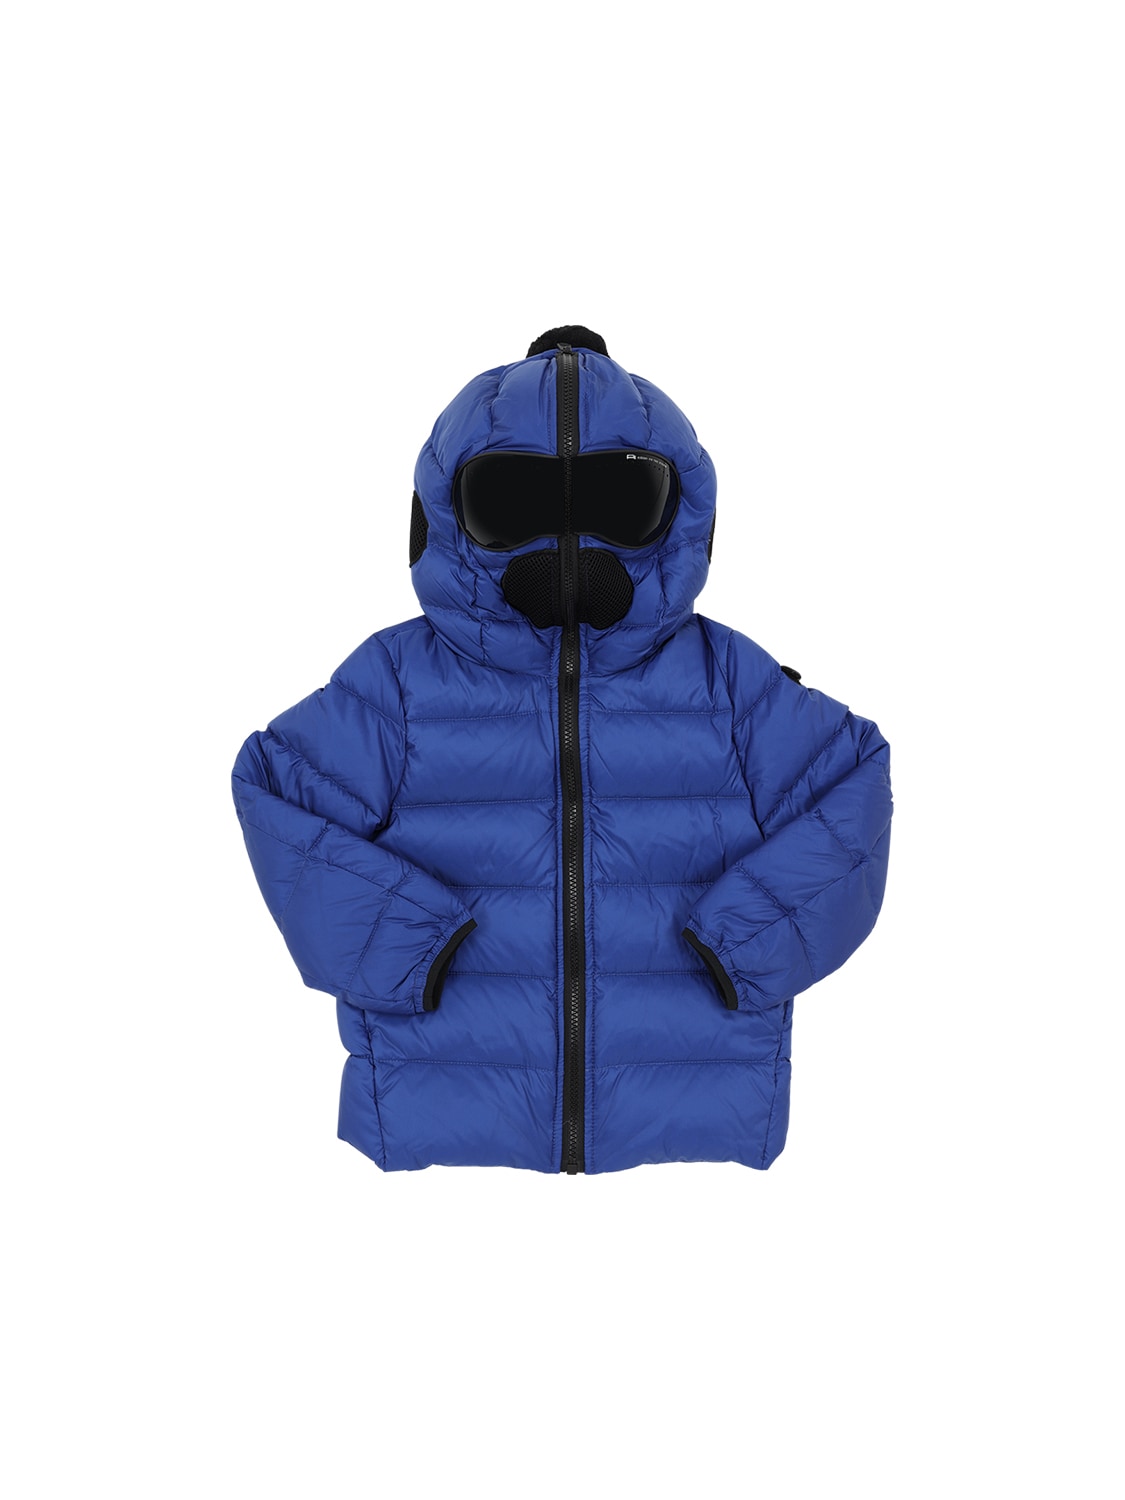 Ai Riders On The Storm Kids' 防水尼龙羽绒服 In Royal Blue